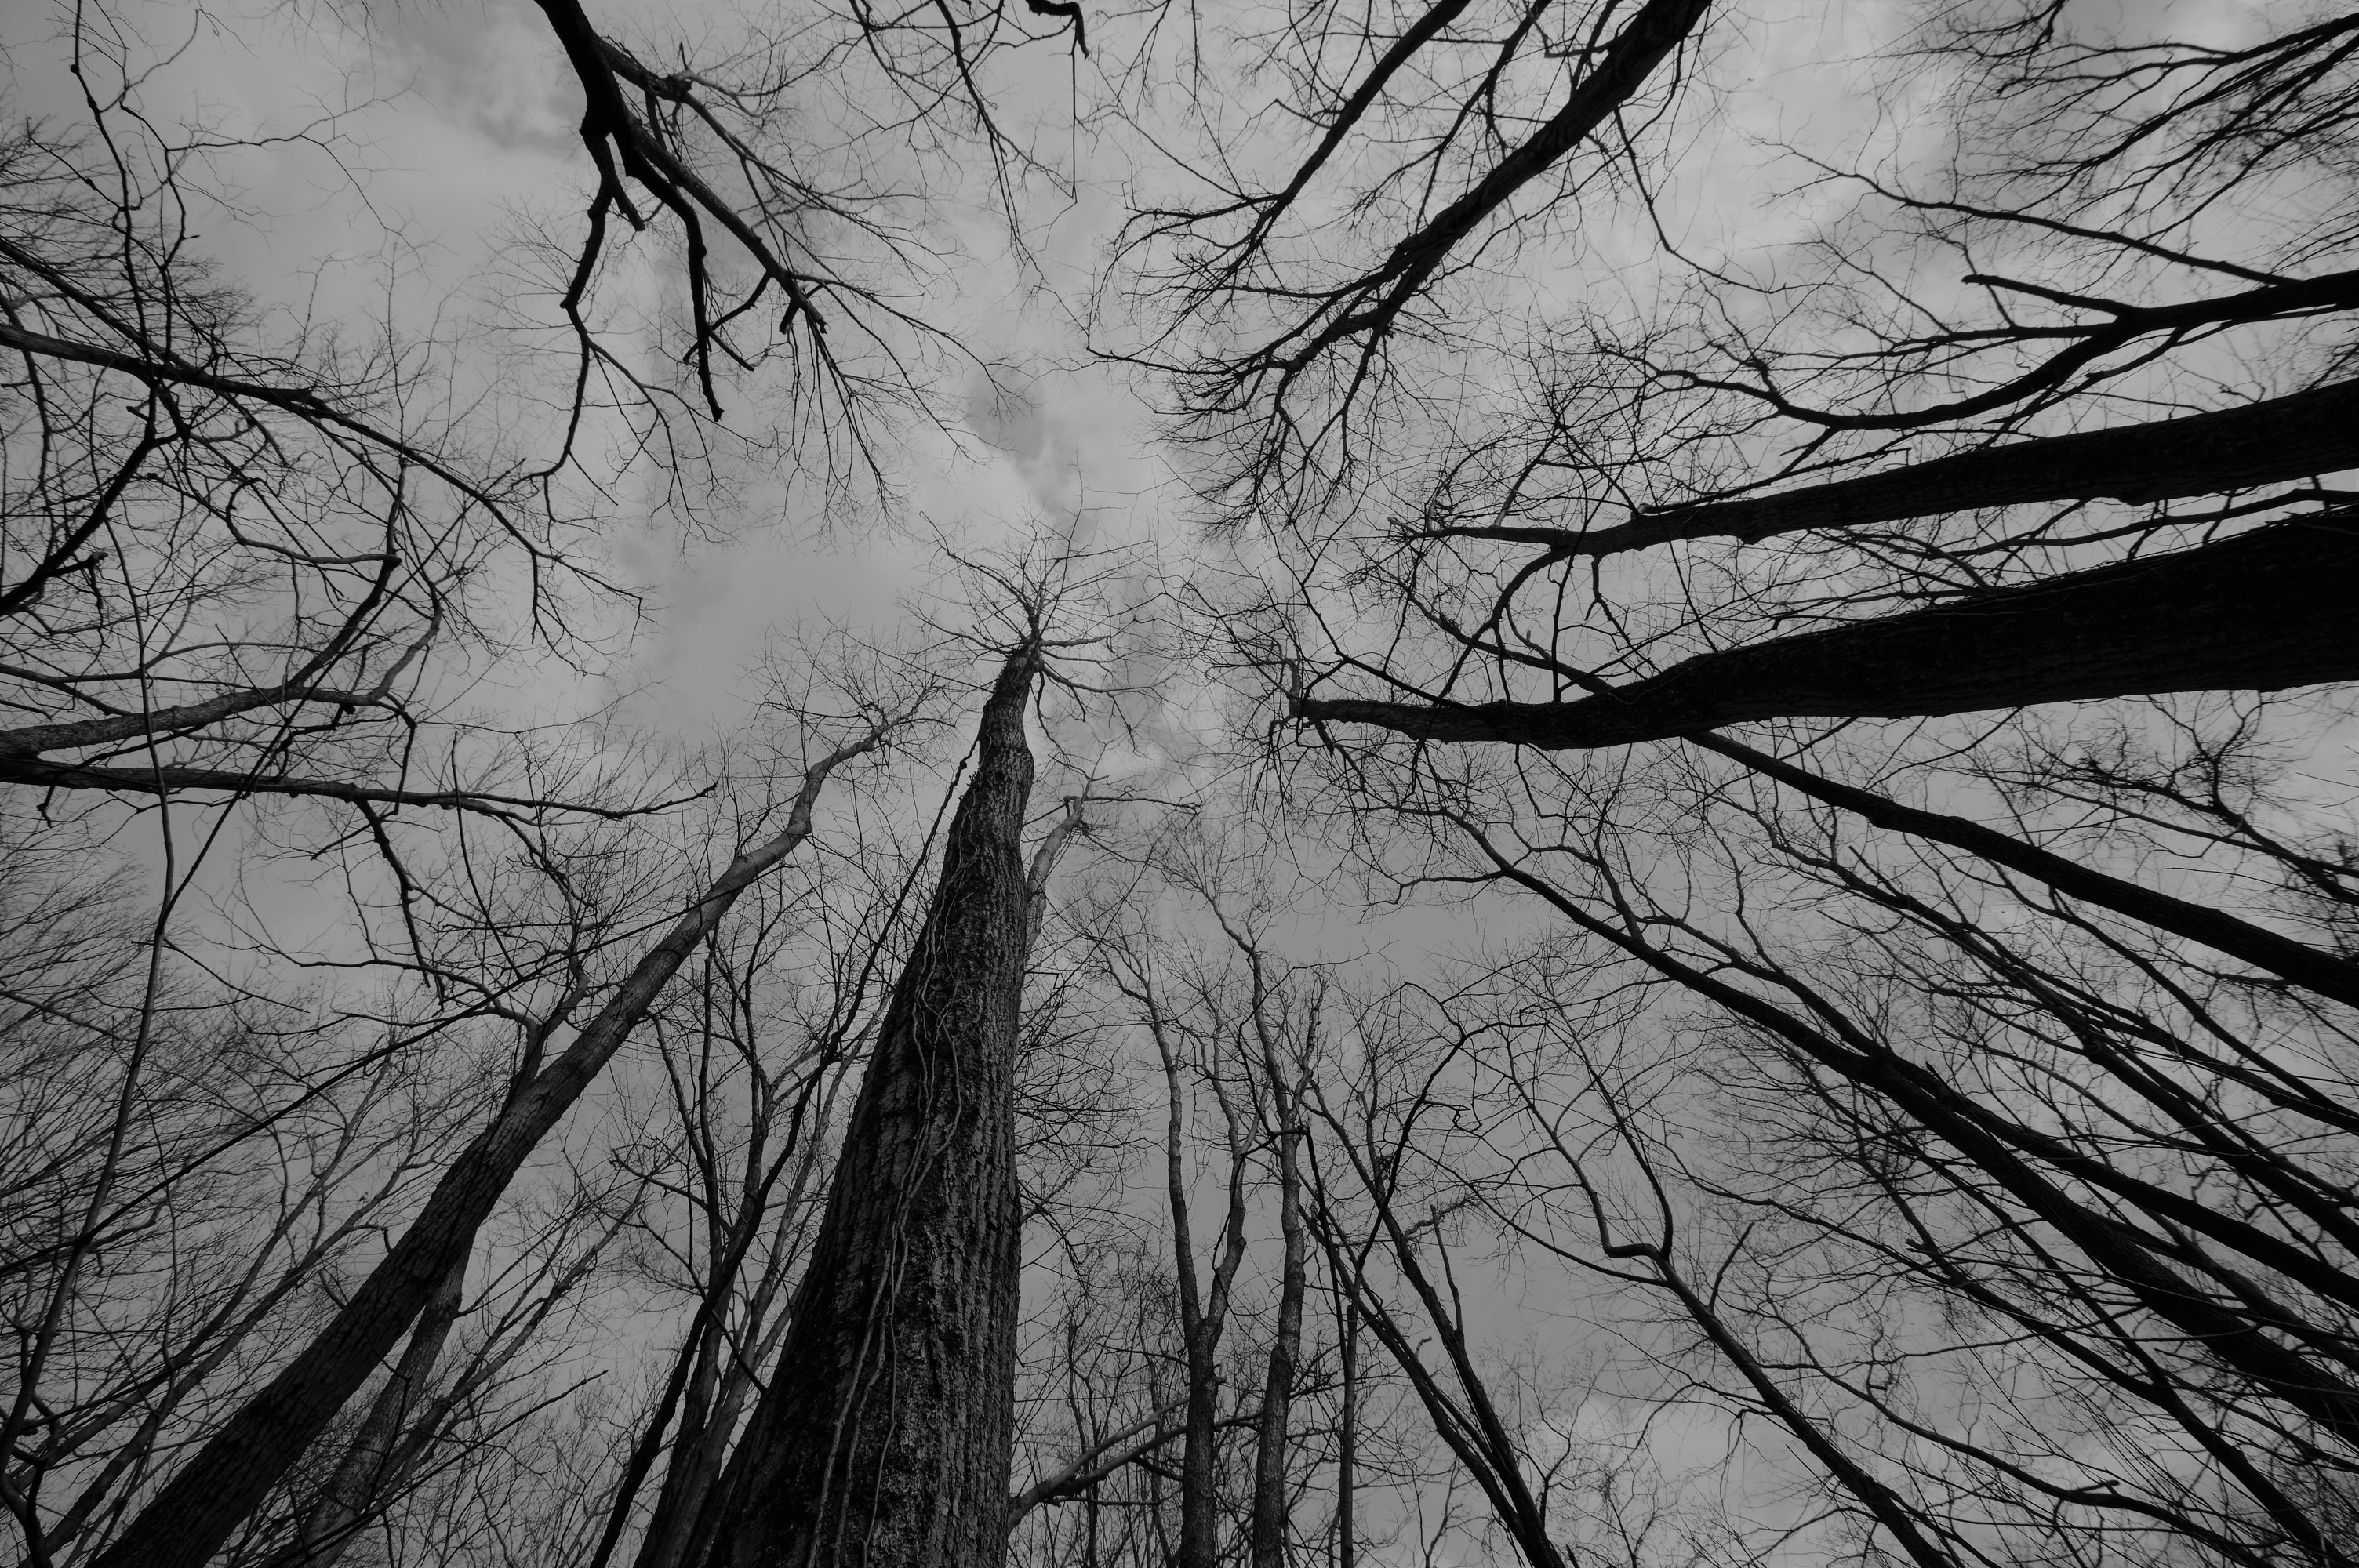 Bare trees. Photo perspective is looking straight up from the ground